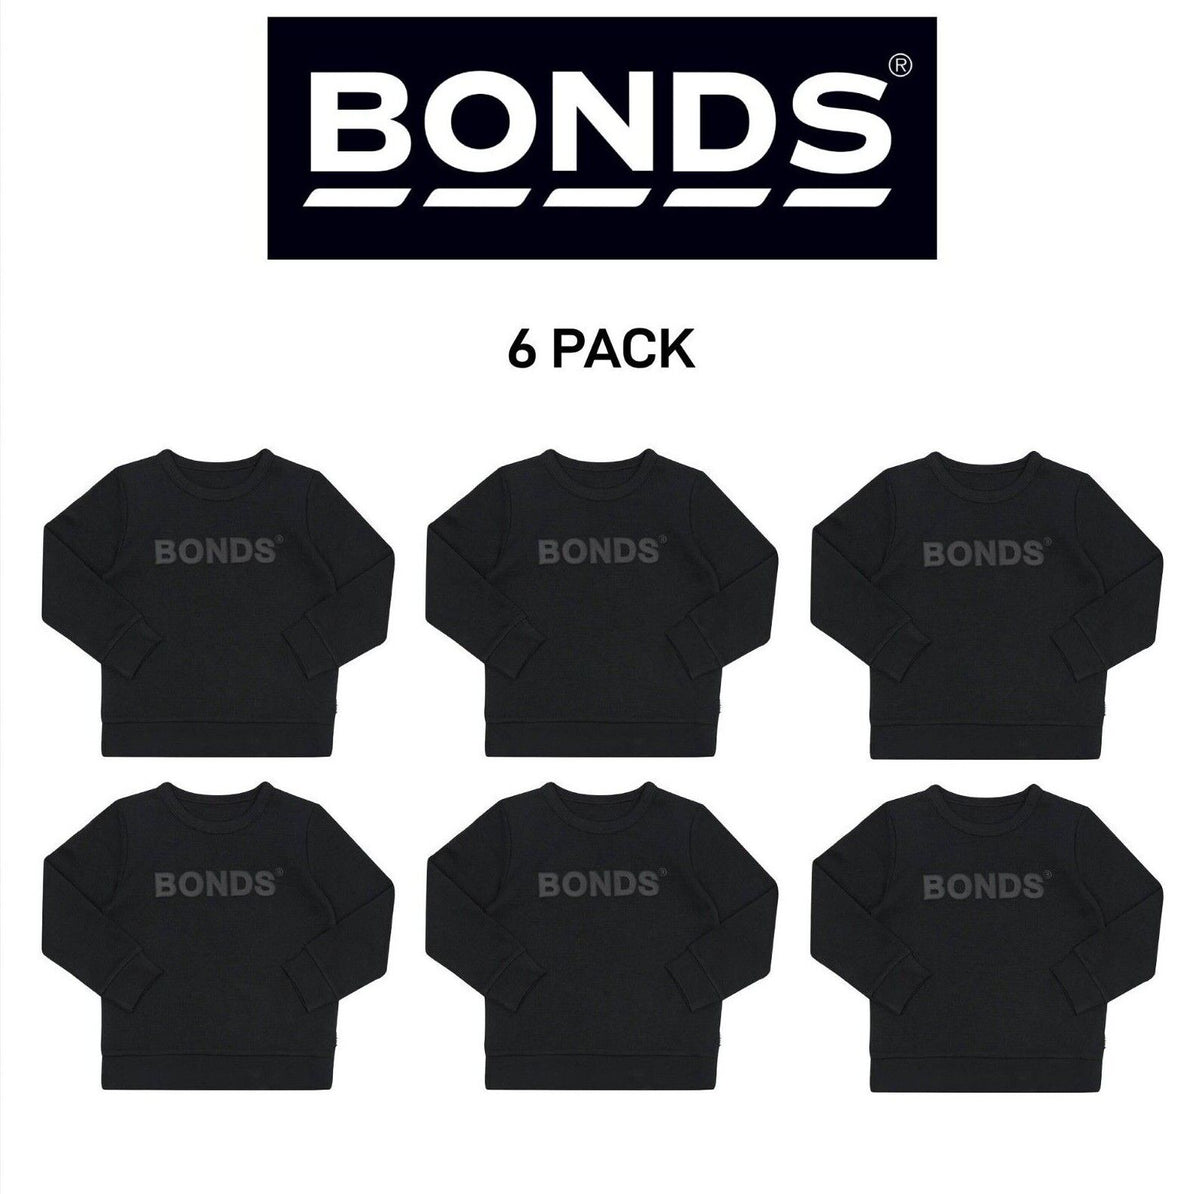 Bonds Baby Tech Sweats Pullover Ultimate Warm Comfort Sporty Style 6 Pack KVQTA